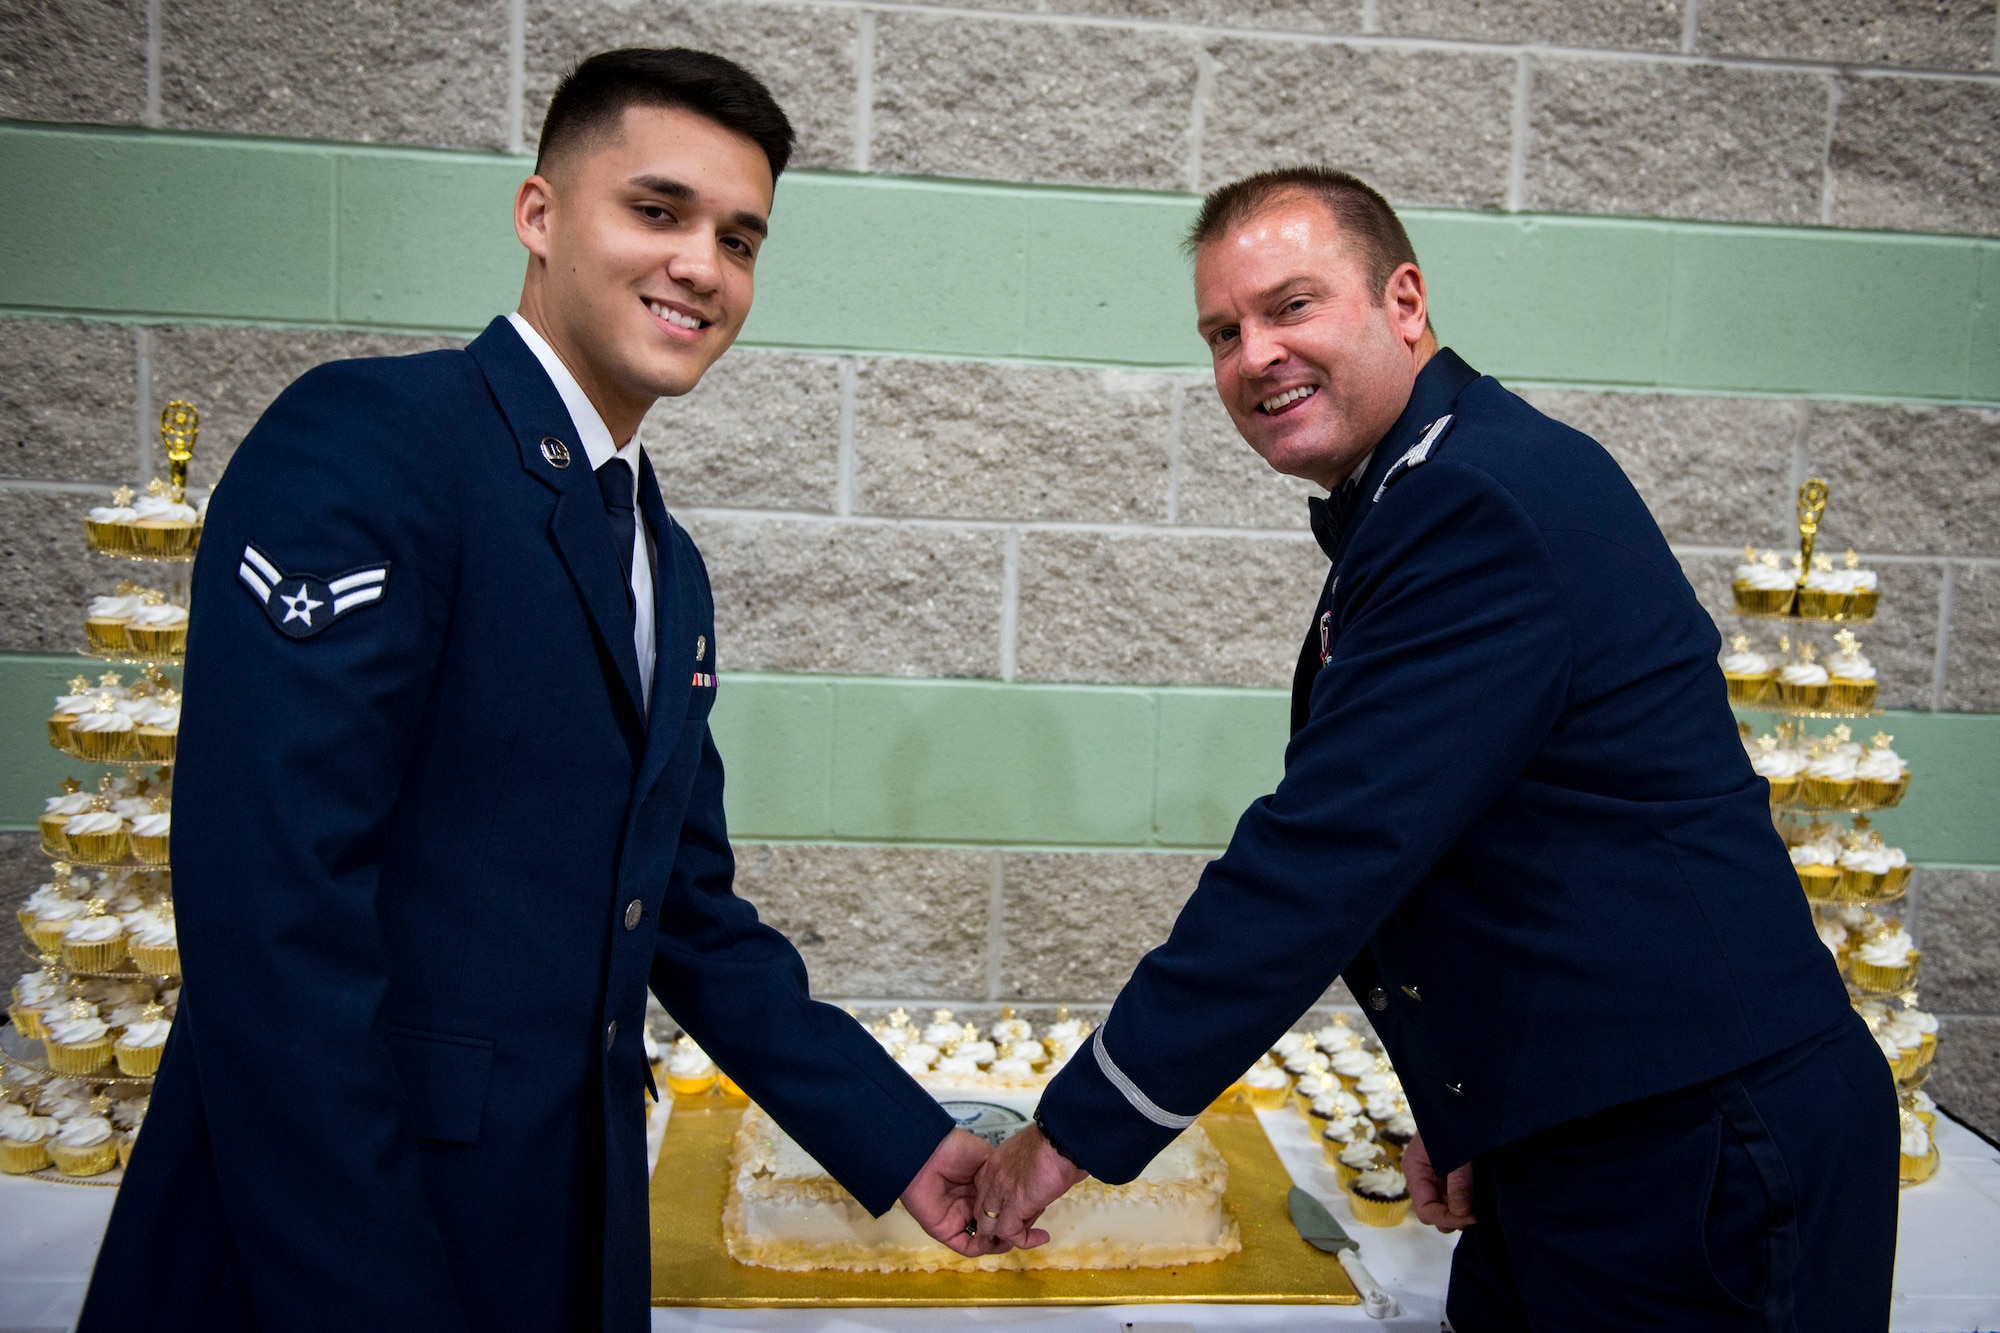 Airman 1st Class David Davenport, left, 23d Logistics Readiness Squadron A-10 parts store apprentice, and Col. Brian Stumpe, 23d Mission Support Group commander, pose for a photo while performing the ceremonial cake-cutting to commemorate the Air Force’s 71st Birthday during the Air Force Ball, Sept. 15, 2018, at the James H. Rainwater Conference Center in Valdosta, Ga. Traditionally, the oldest and youngest service members are the first to cut the cake to commemorate all those who serve. (U.S. Air Force photo by Airman 1st Class Erick Requadt)